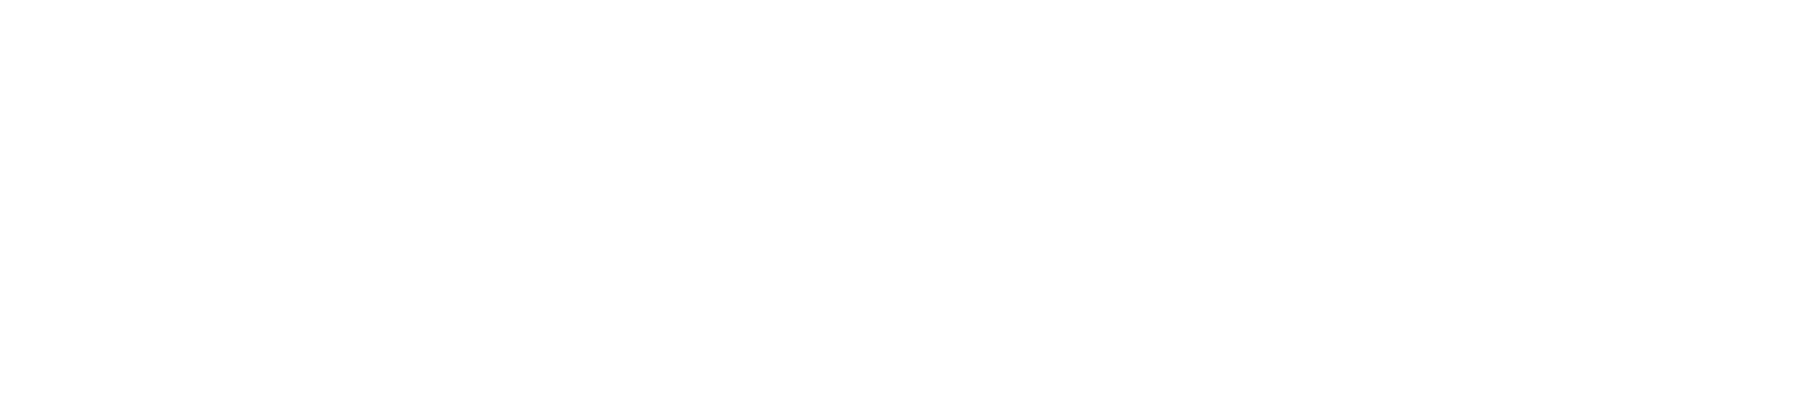 SecureDecal Powered By Jewish Federation of SPBC Logo